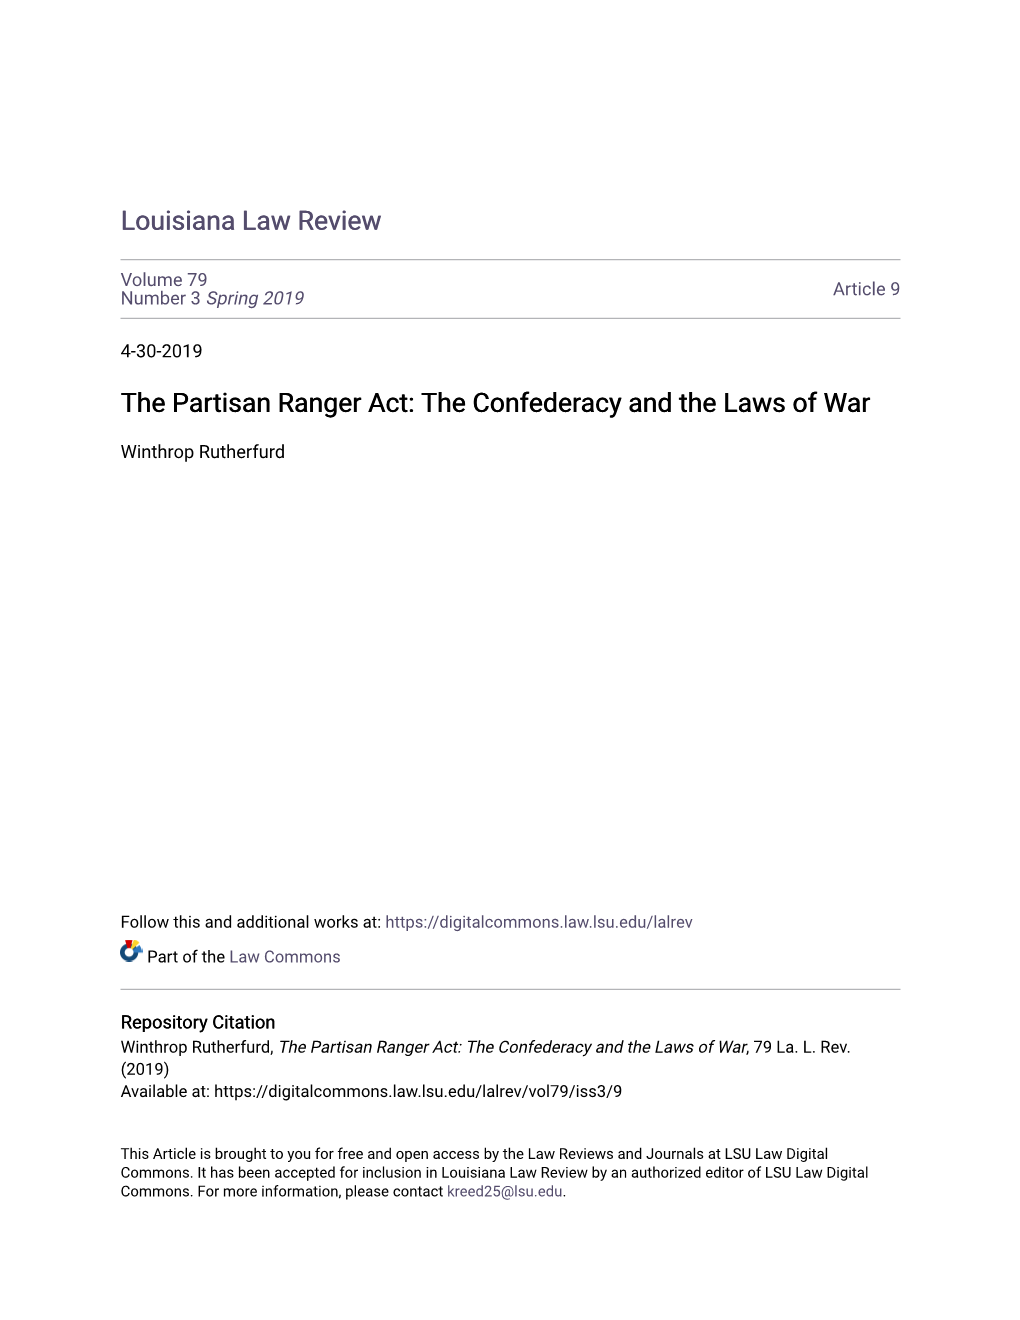 The Partisan Ranger Act: the Confederacy and the Laws of War